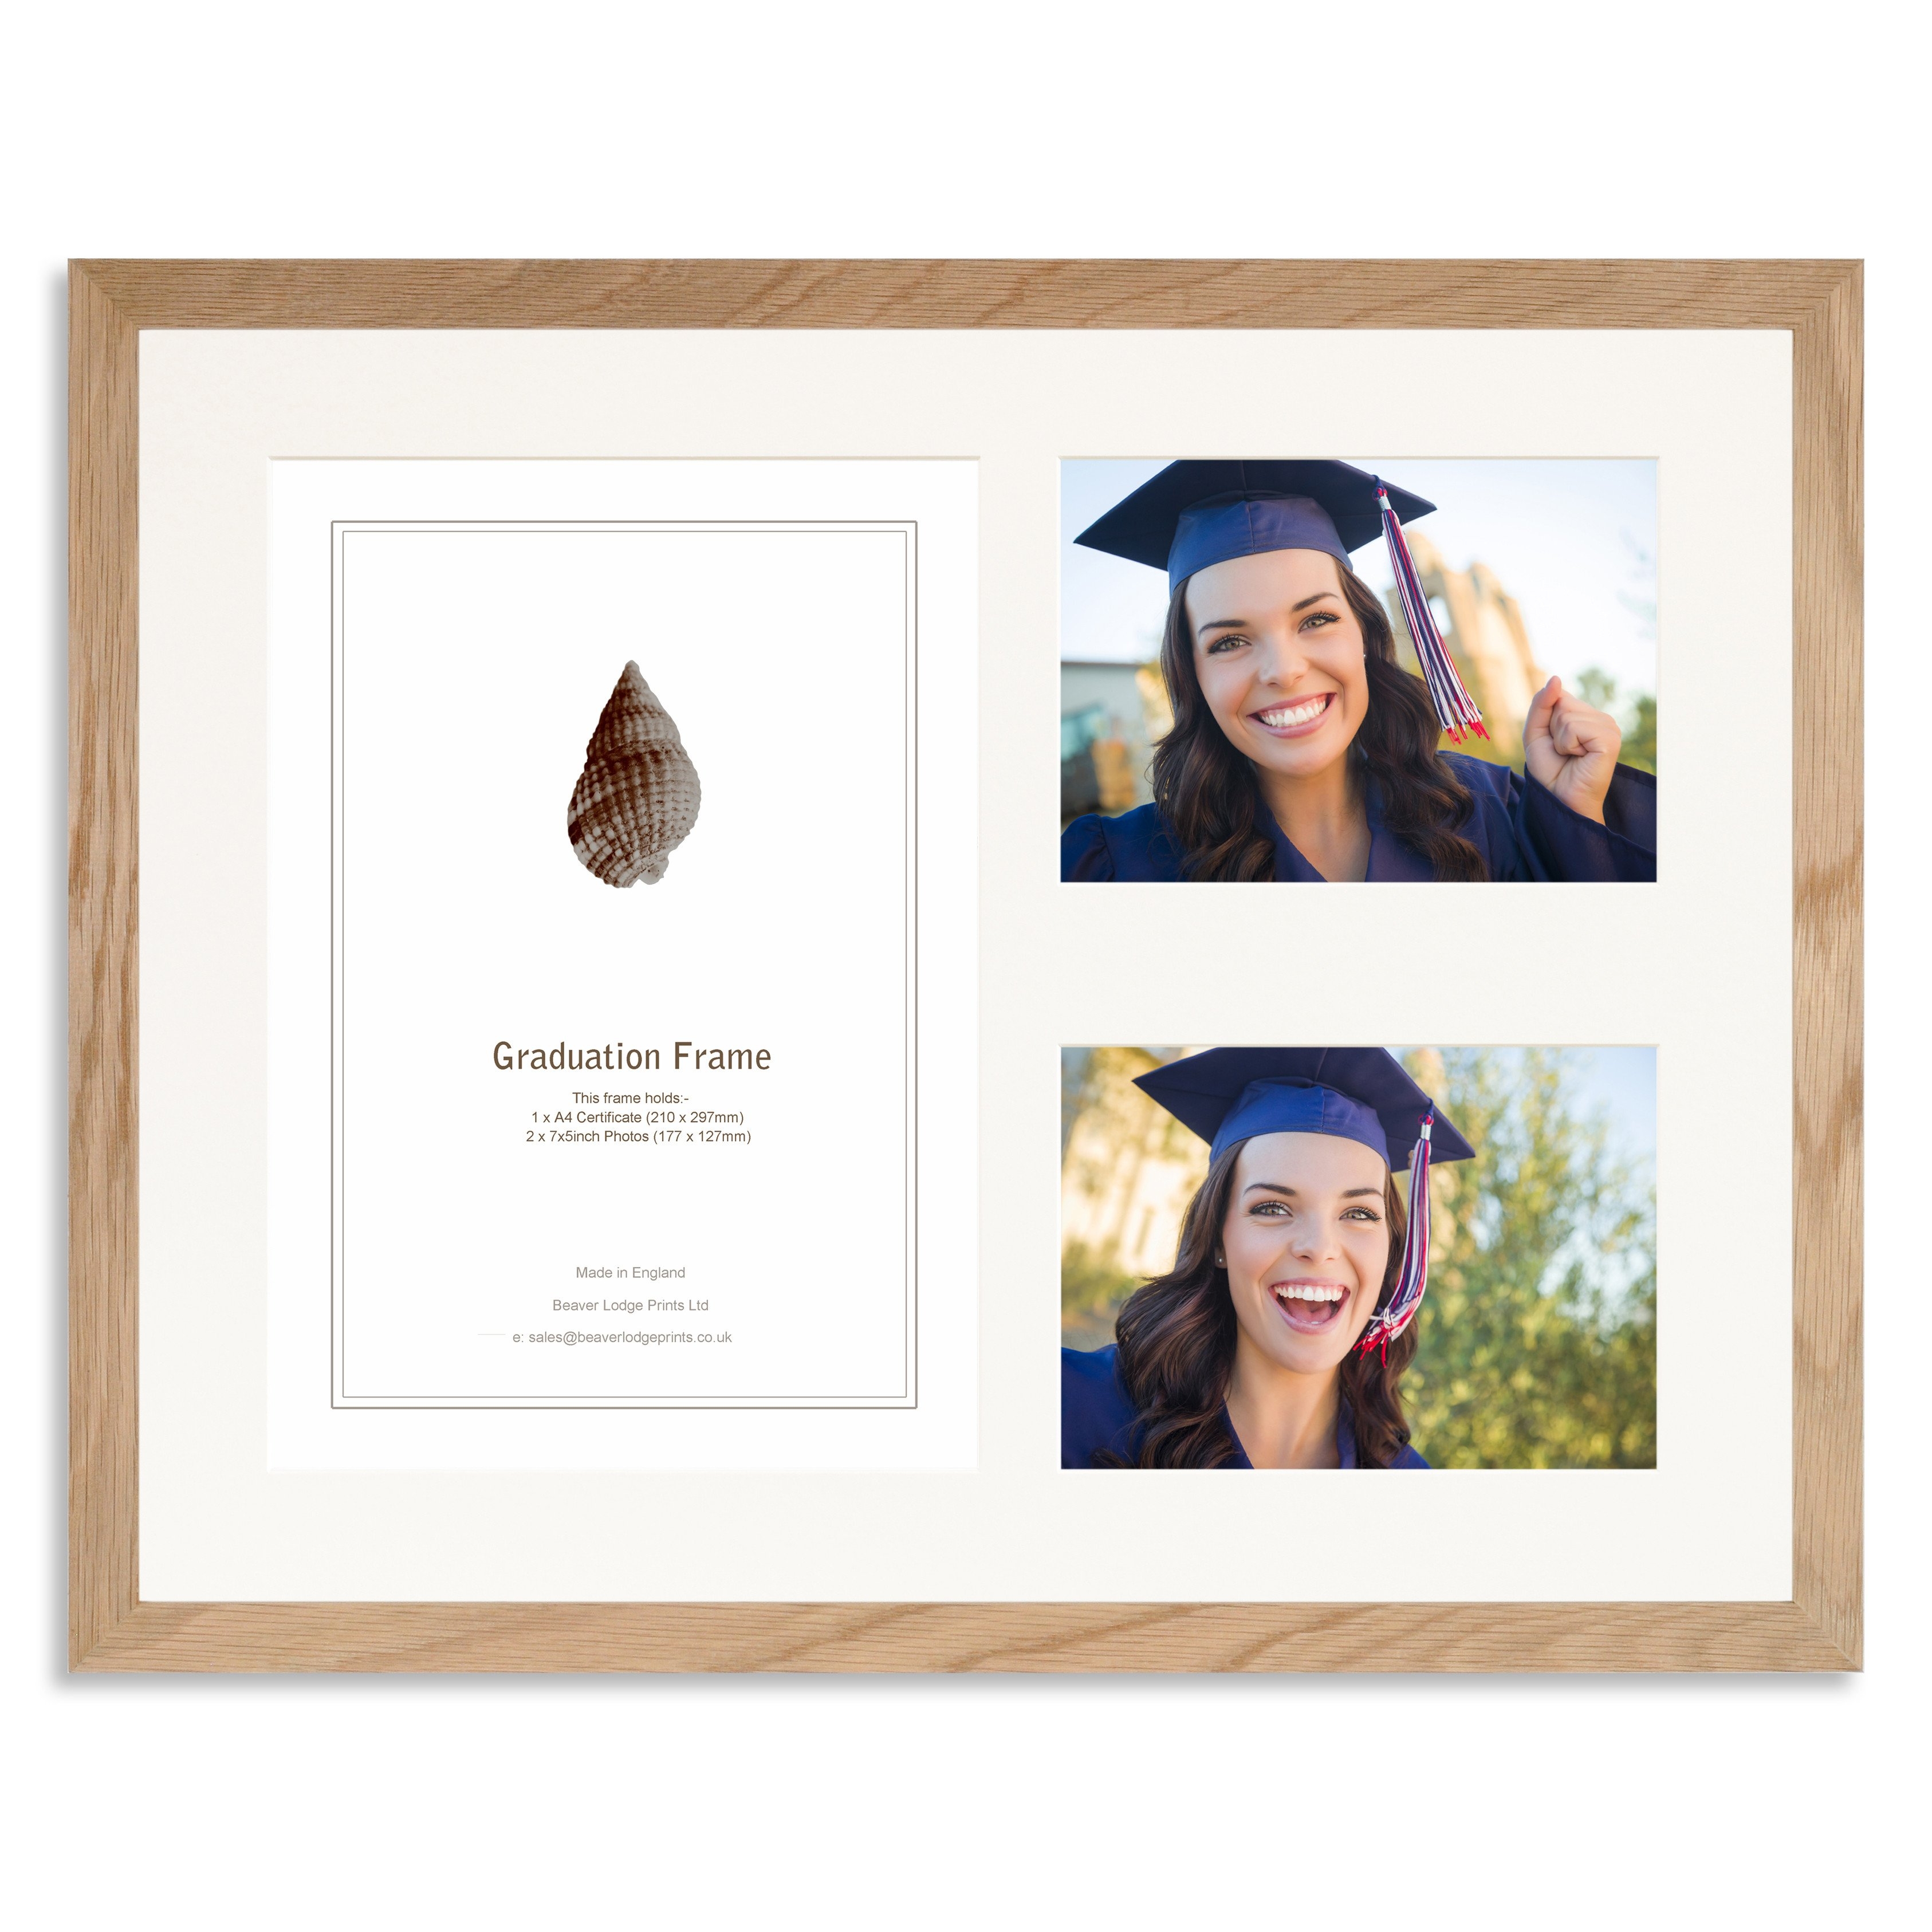 Solid Oak Graduation Frame for A4 Certificate and two 7×5/5x7inch Photos